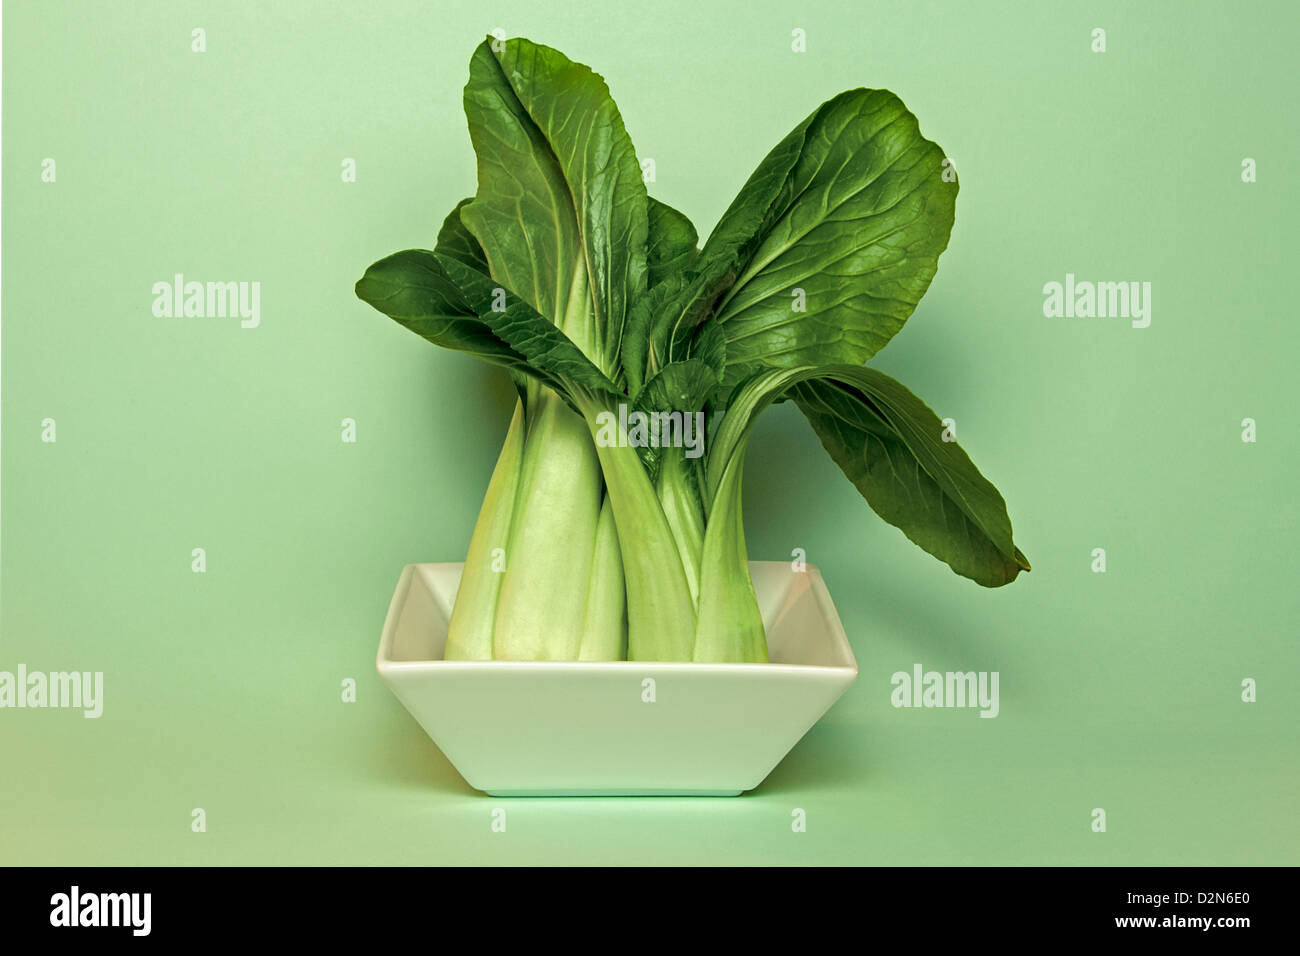 Pair of pak choi in square bowl against a mint green background Stock Photo